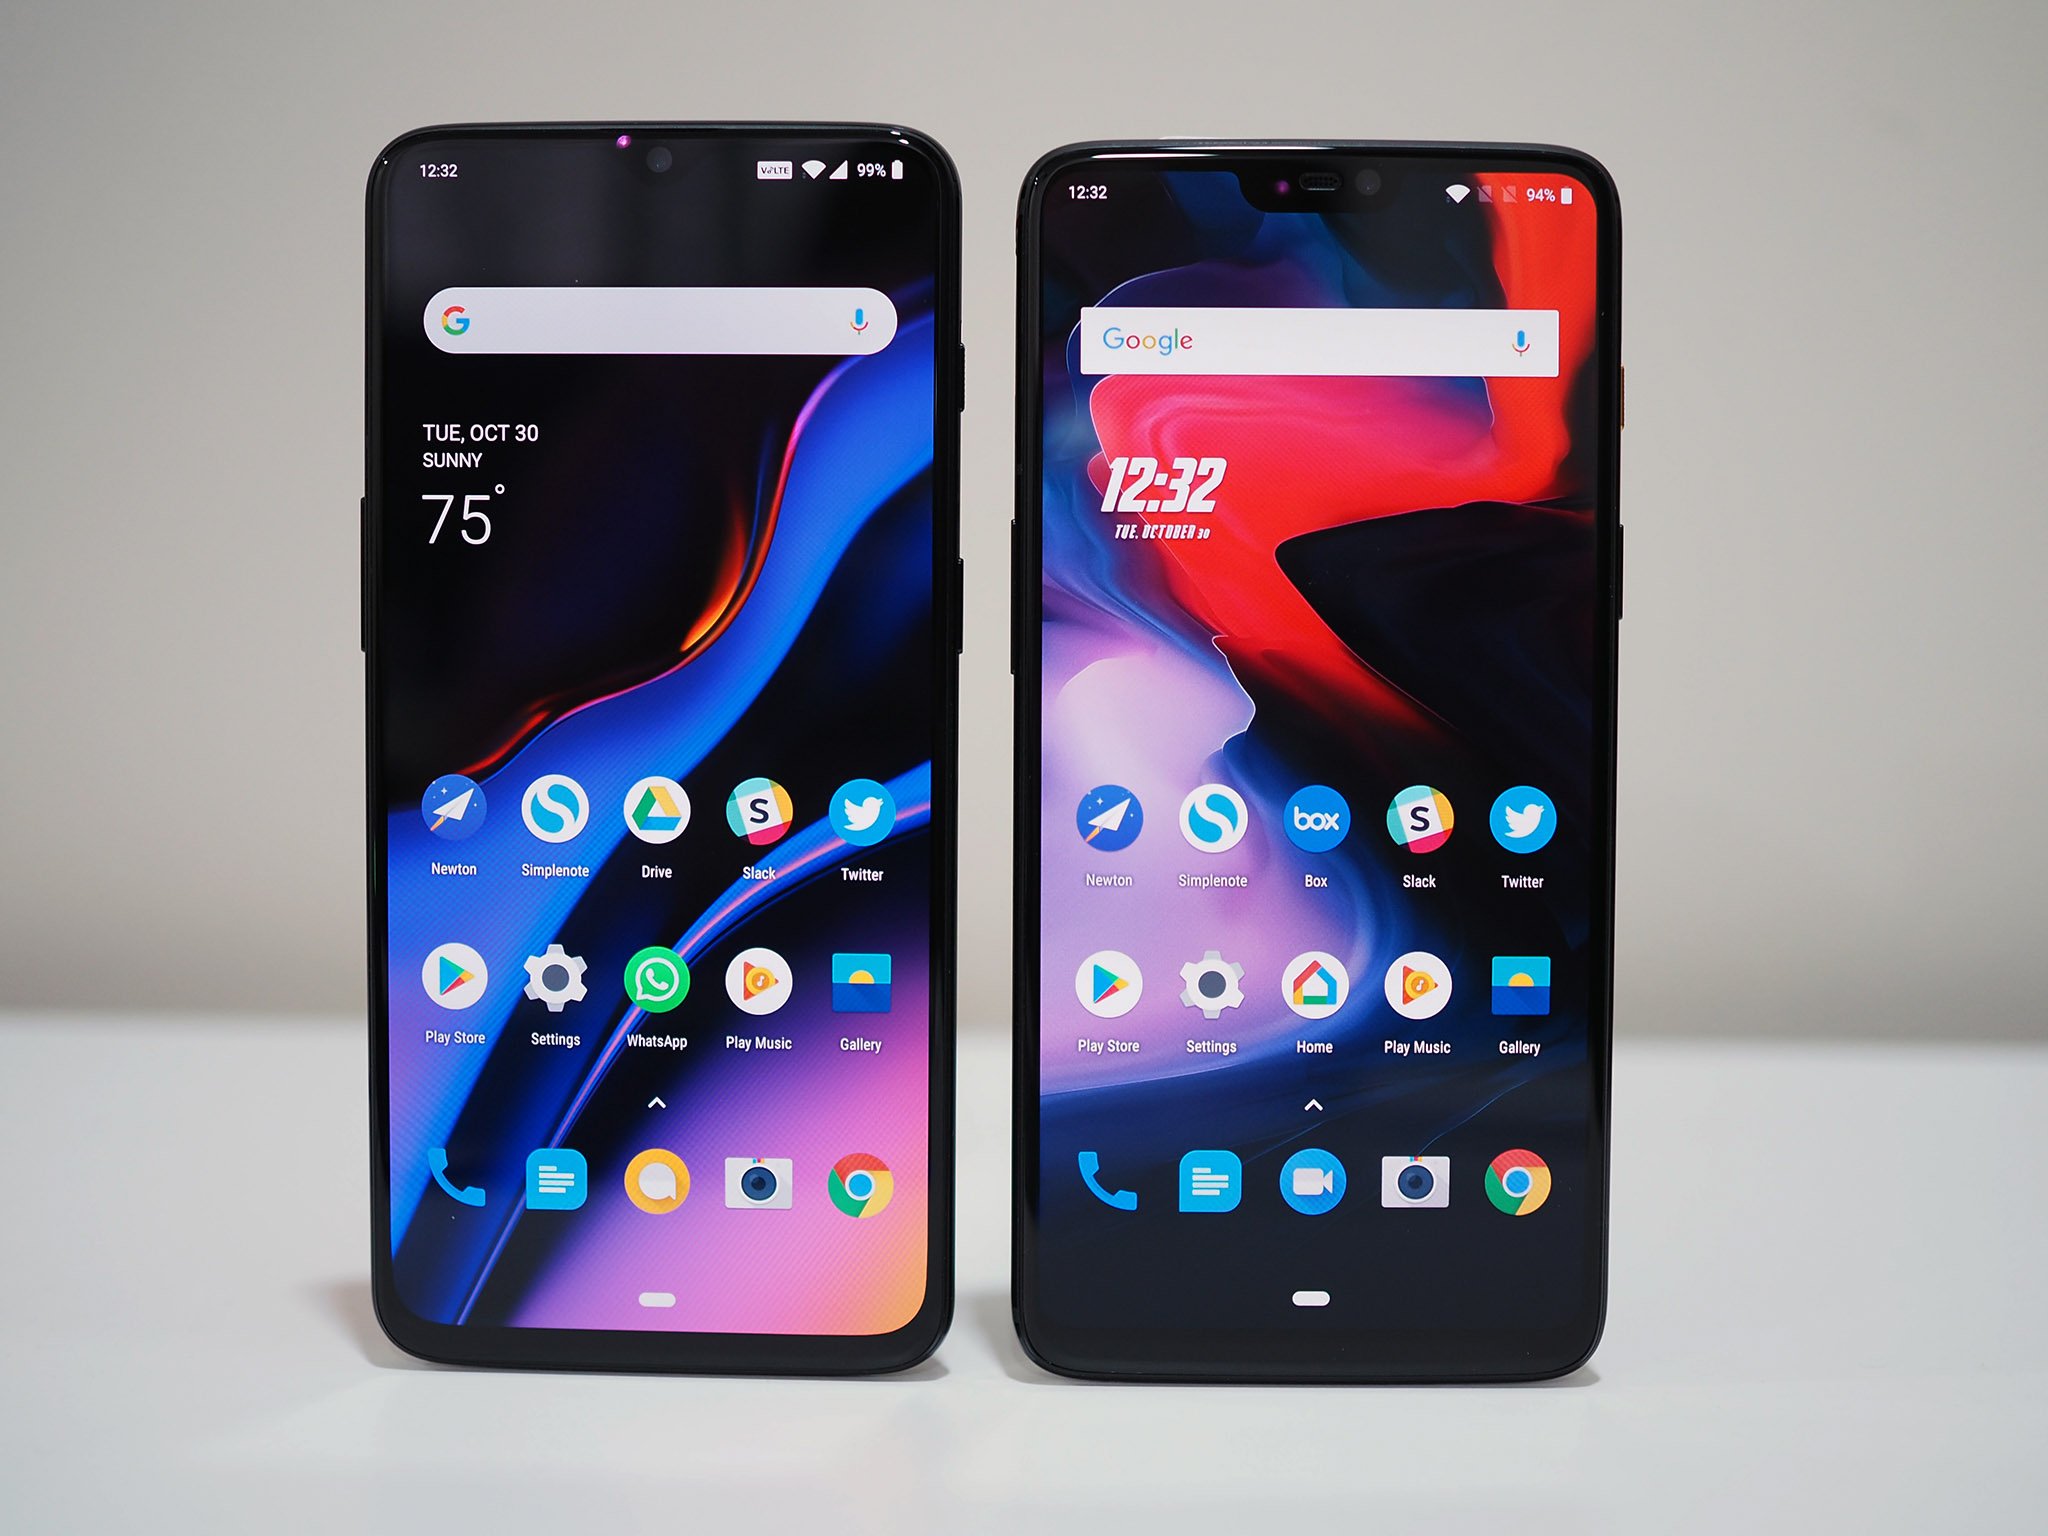 OnePlus 6T and OnePlus 6